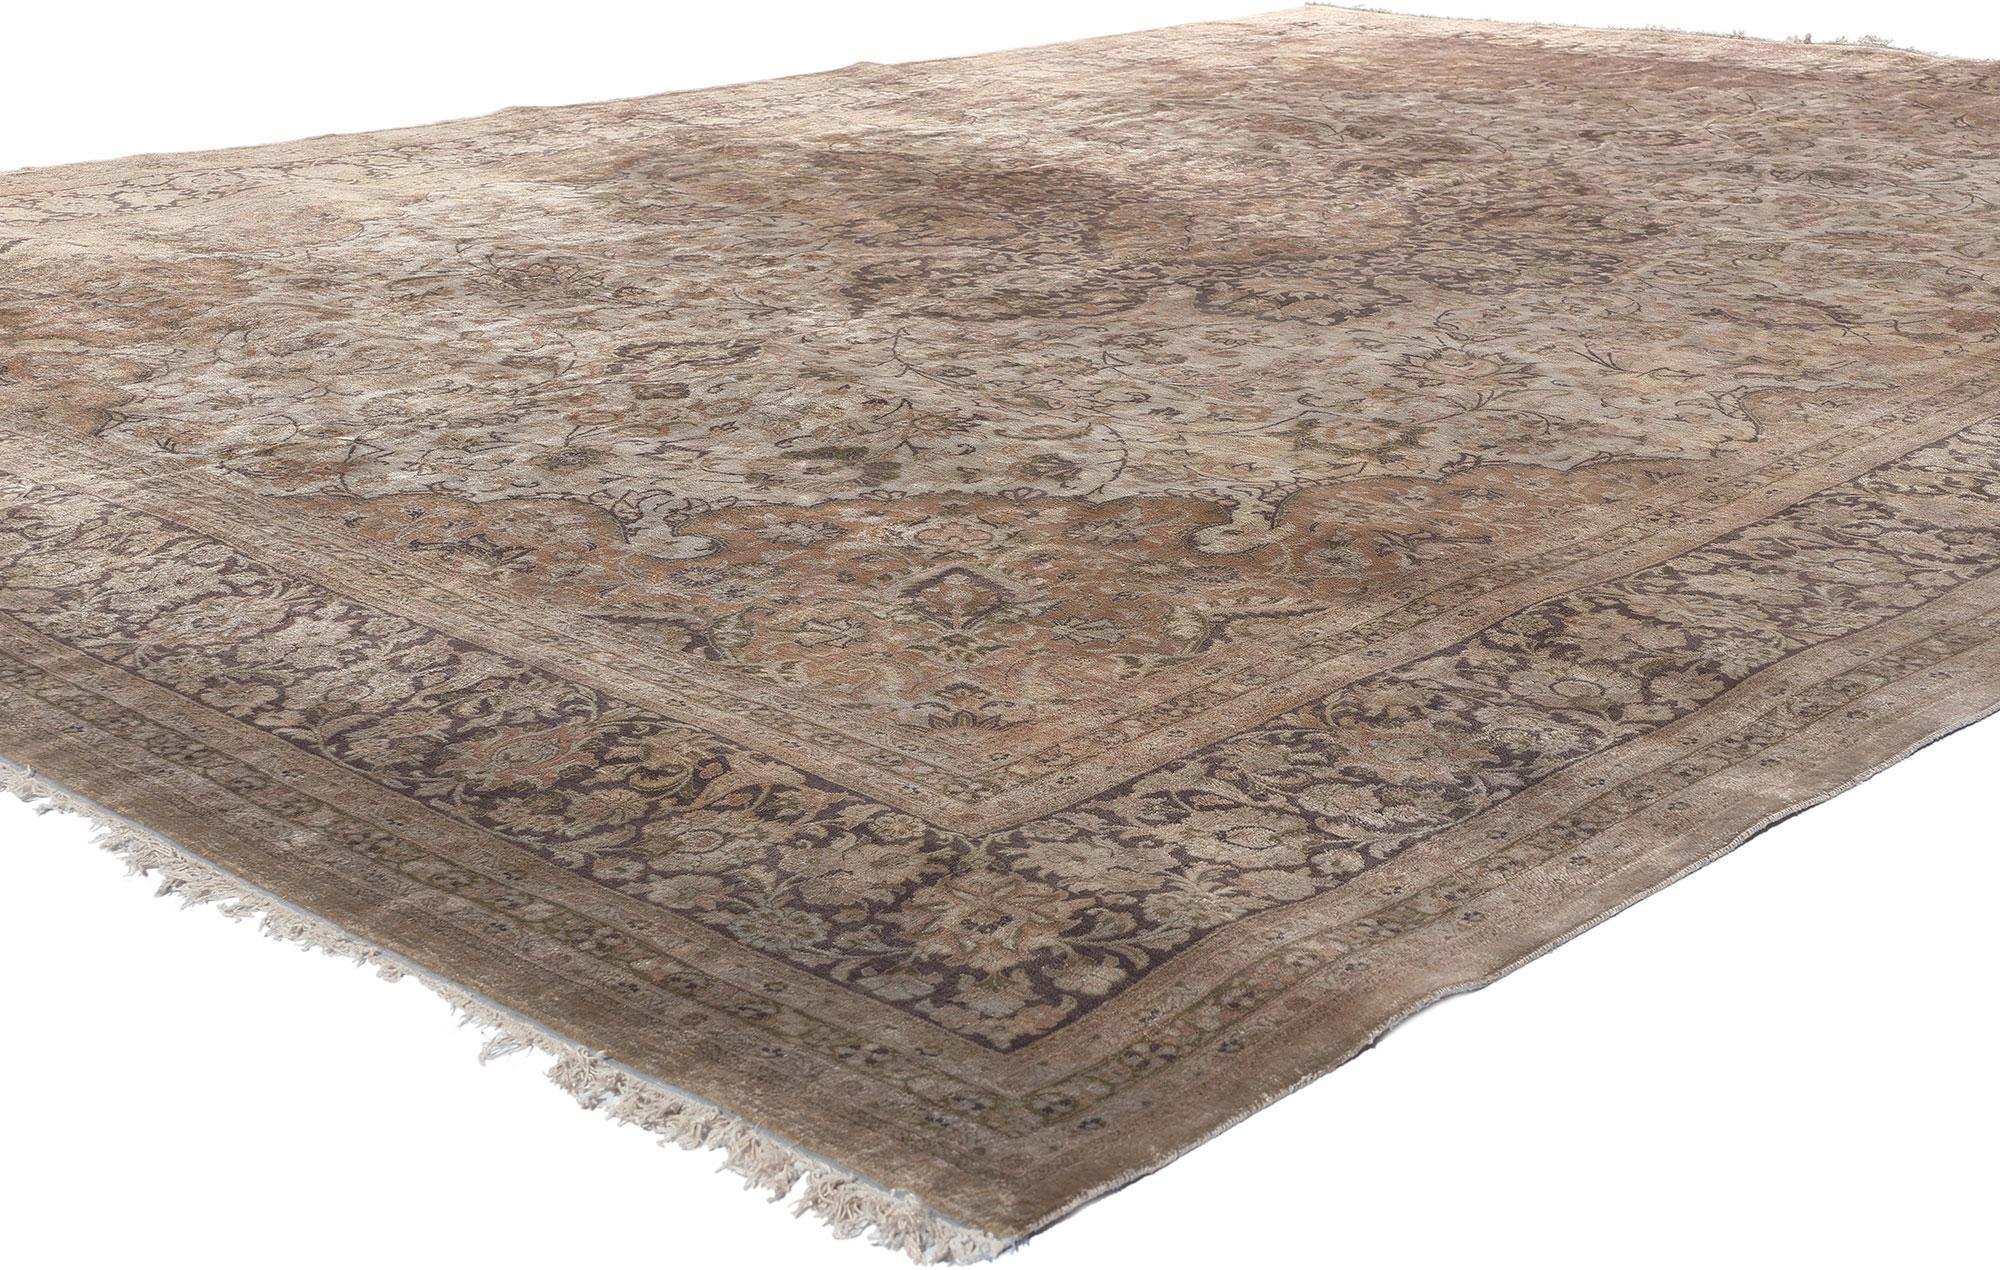 77669 Vintage Persian silk qum rug with Chippendale Style 08'02 x 11'06. Warm and sophisticated with incredible detail and texture, this hand-knotted silk vintage Persian Qum rug beautifully embodies Chippendale style. The silky field features a